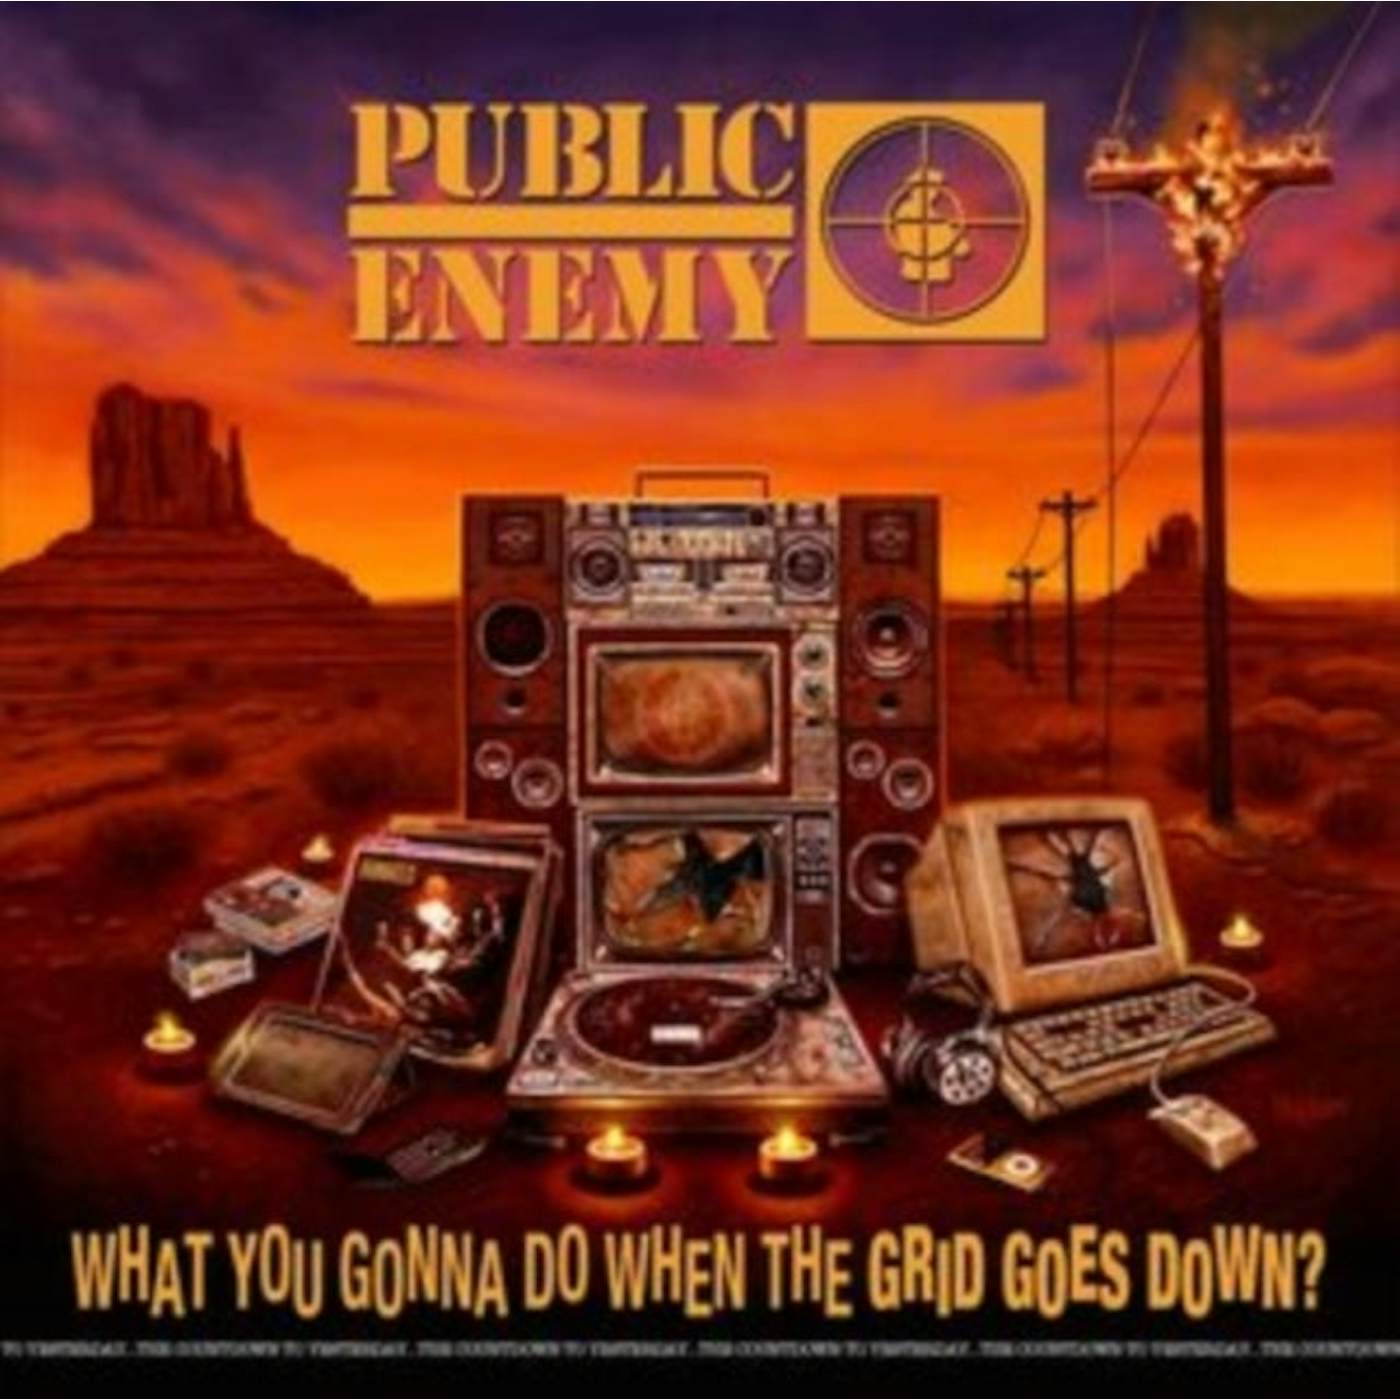 Public Enemy LP Vinyl Record - What You Gonna Do When The Grid Goes Down?